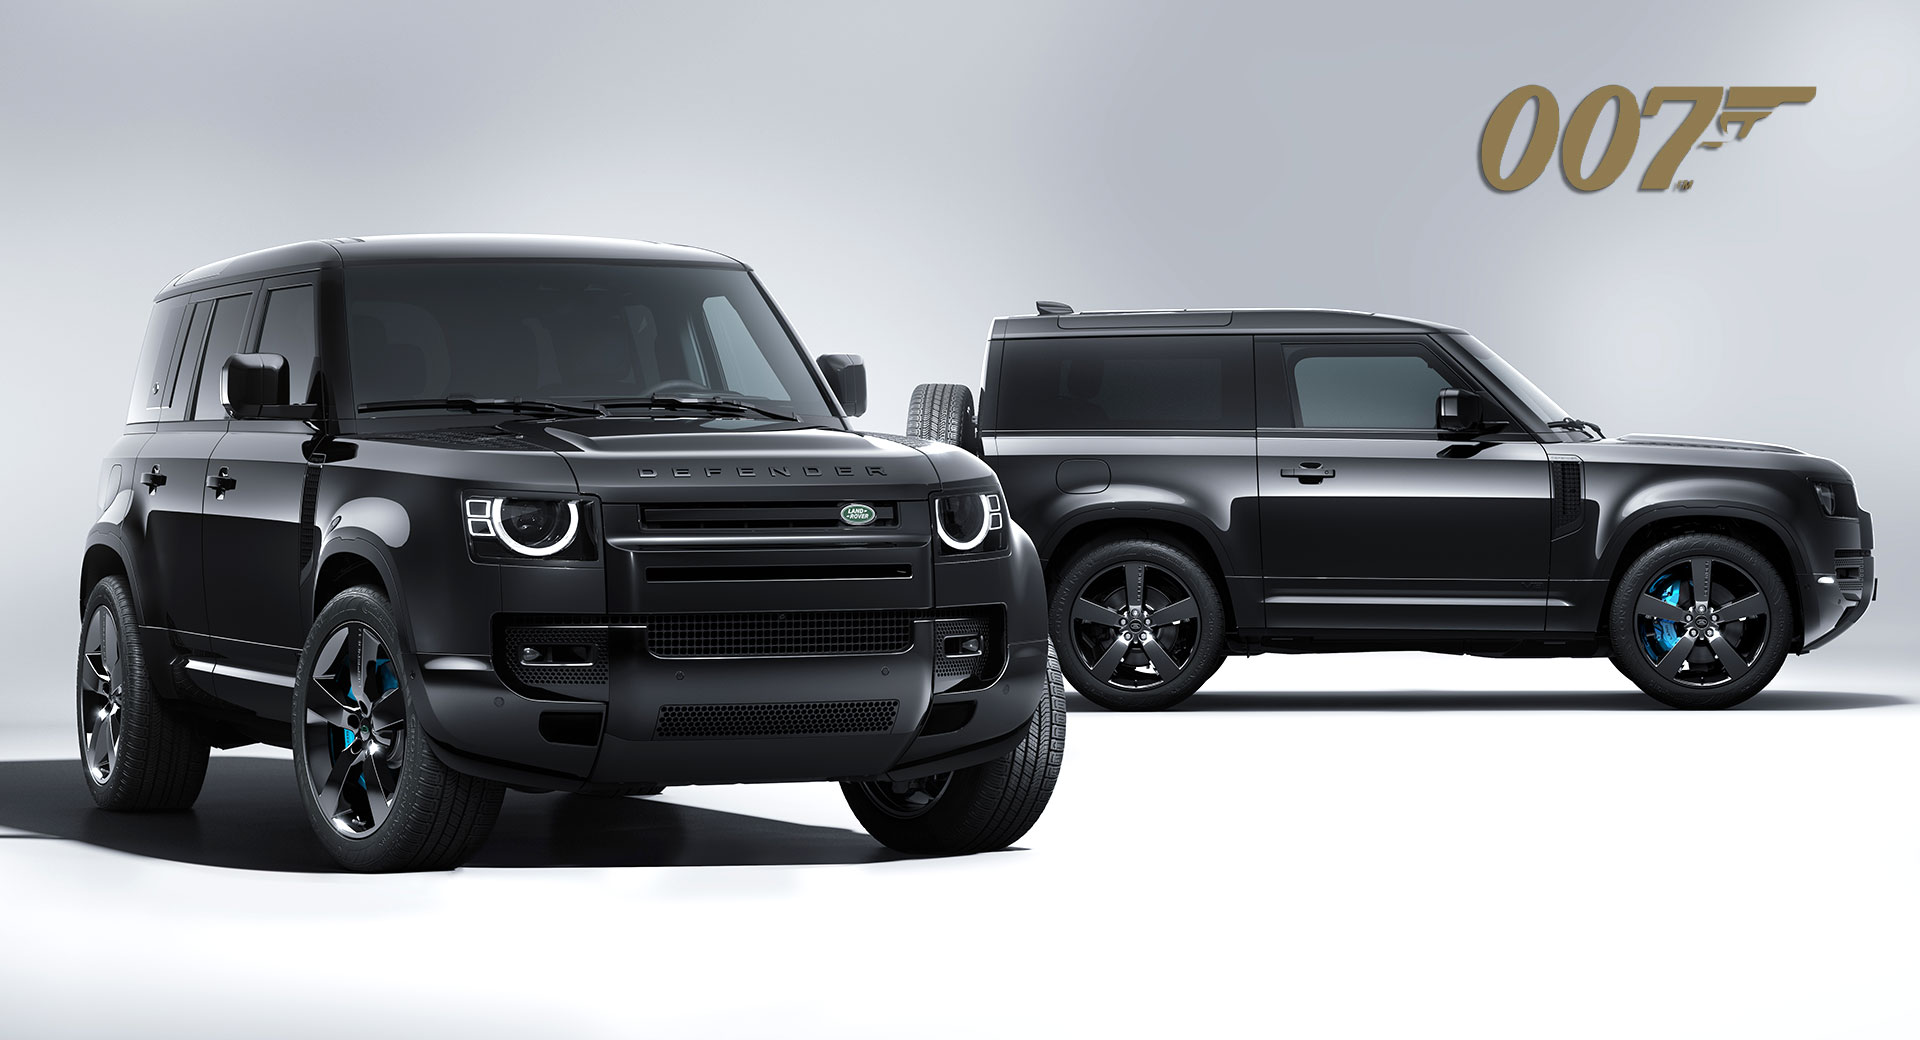 Land Rover Drops New Defender V8 Bond Edition Limited To 300 Units